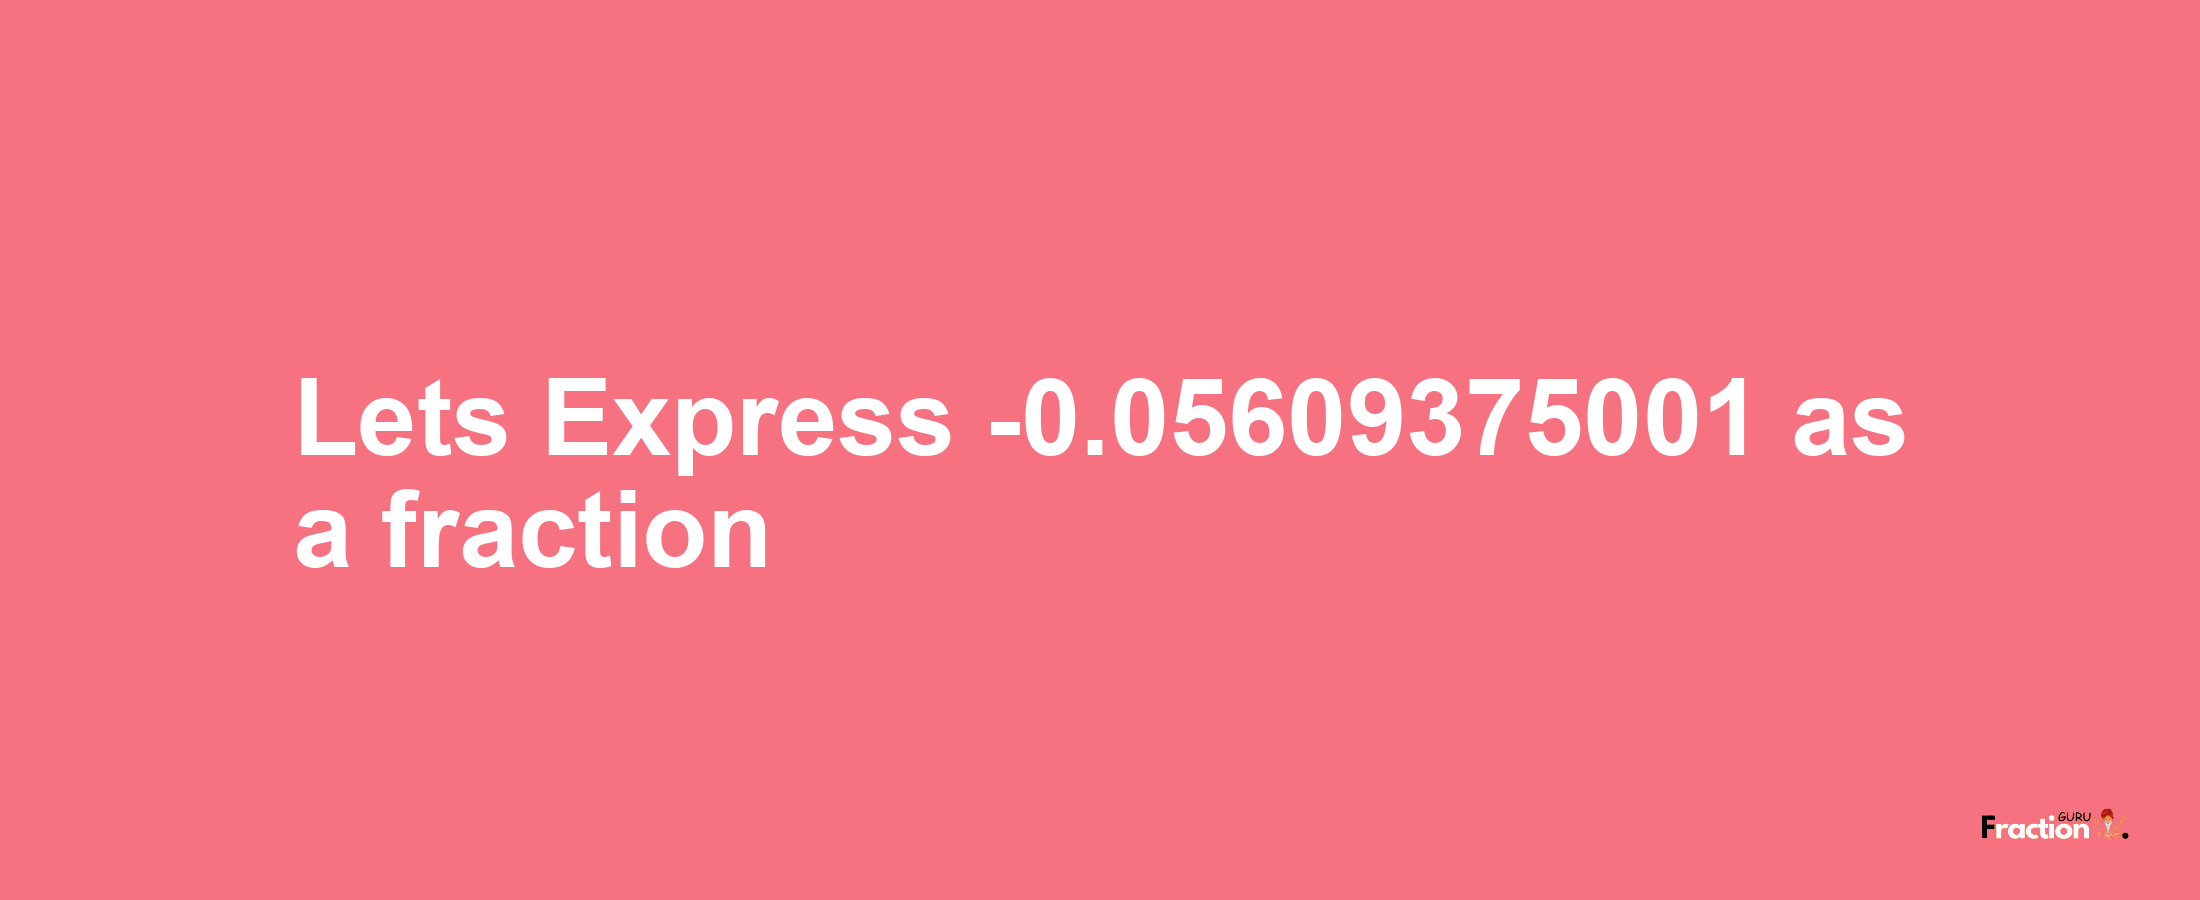 Lets Express -0.05609375001 as afraction